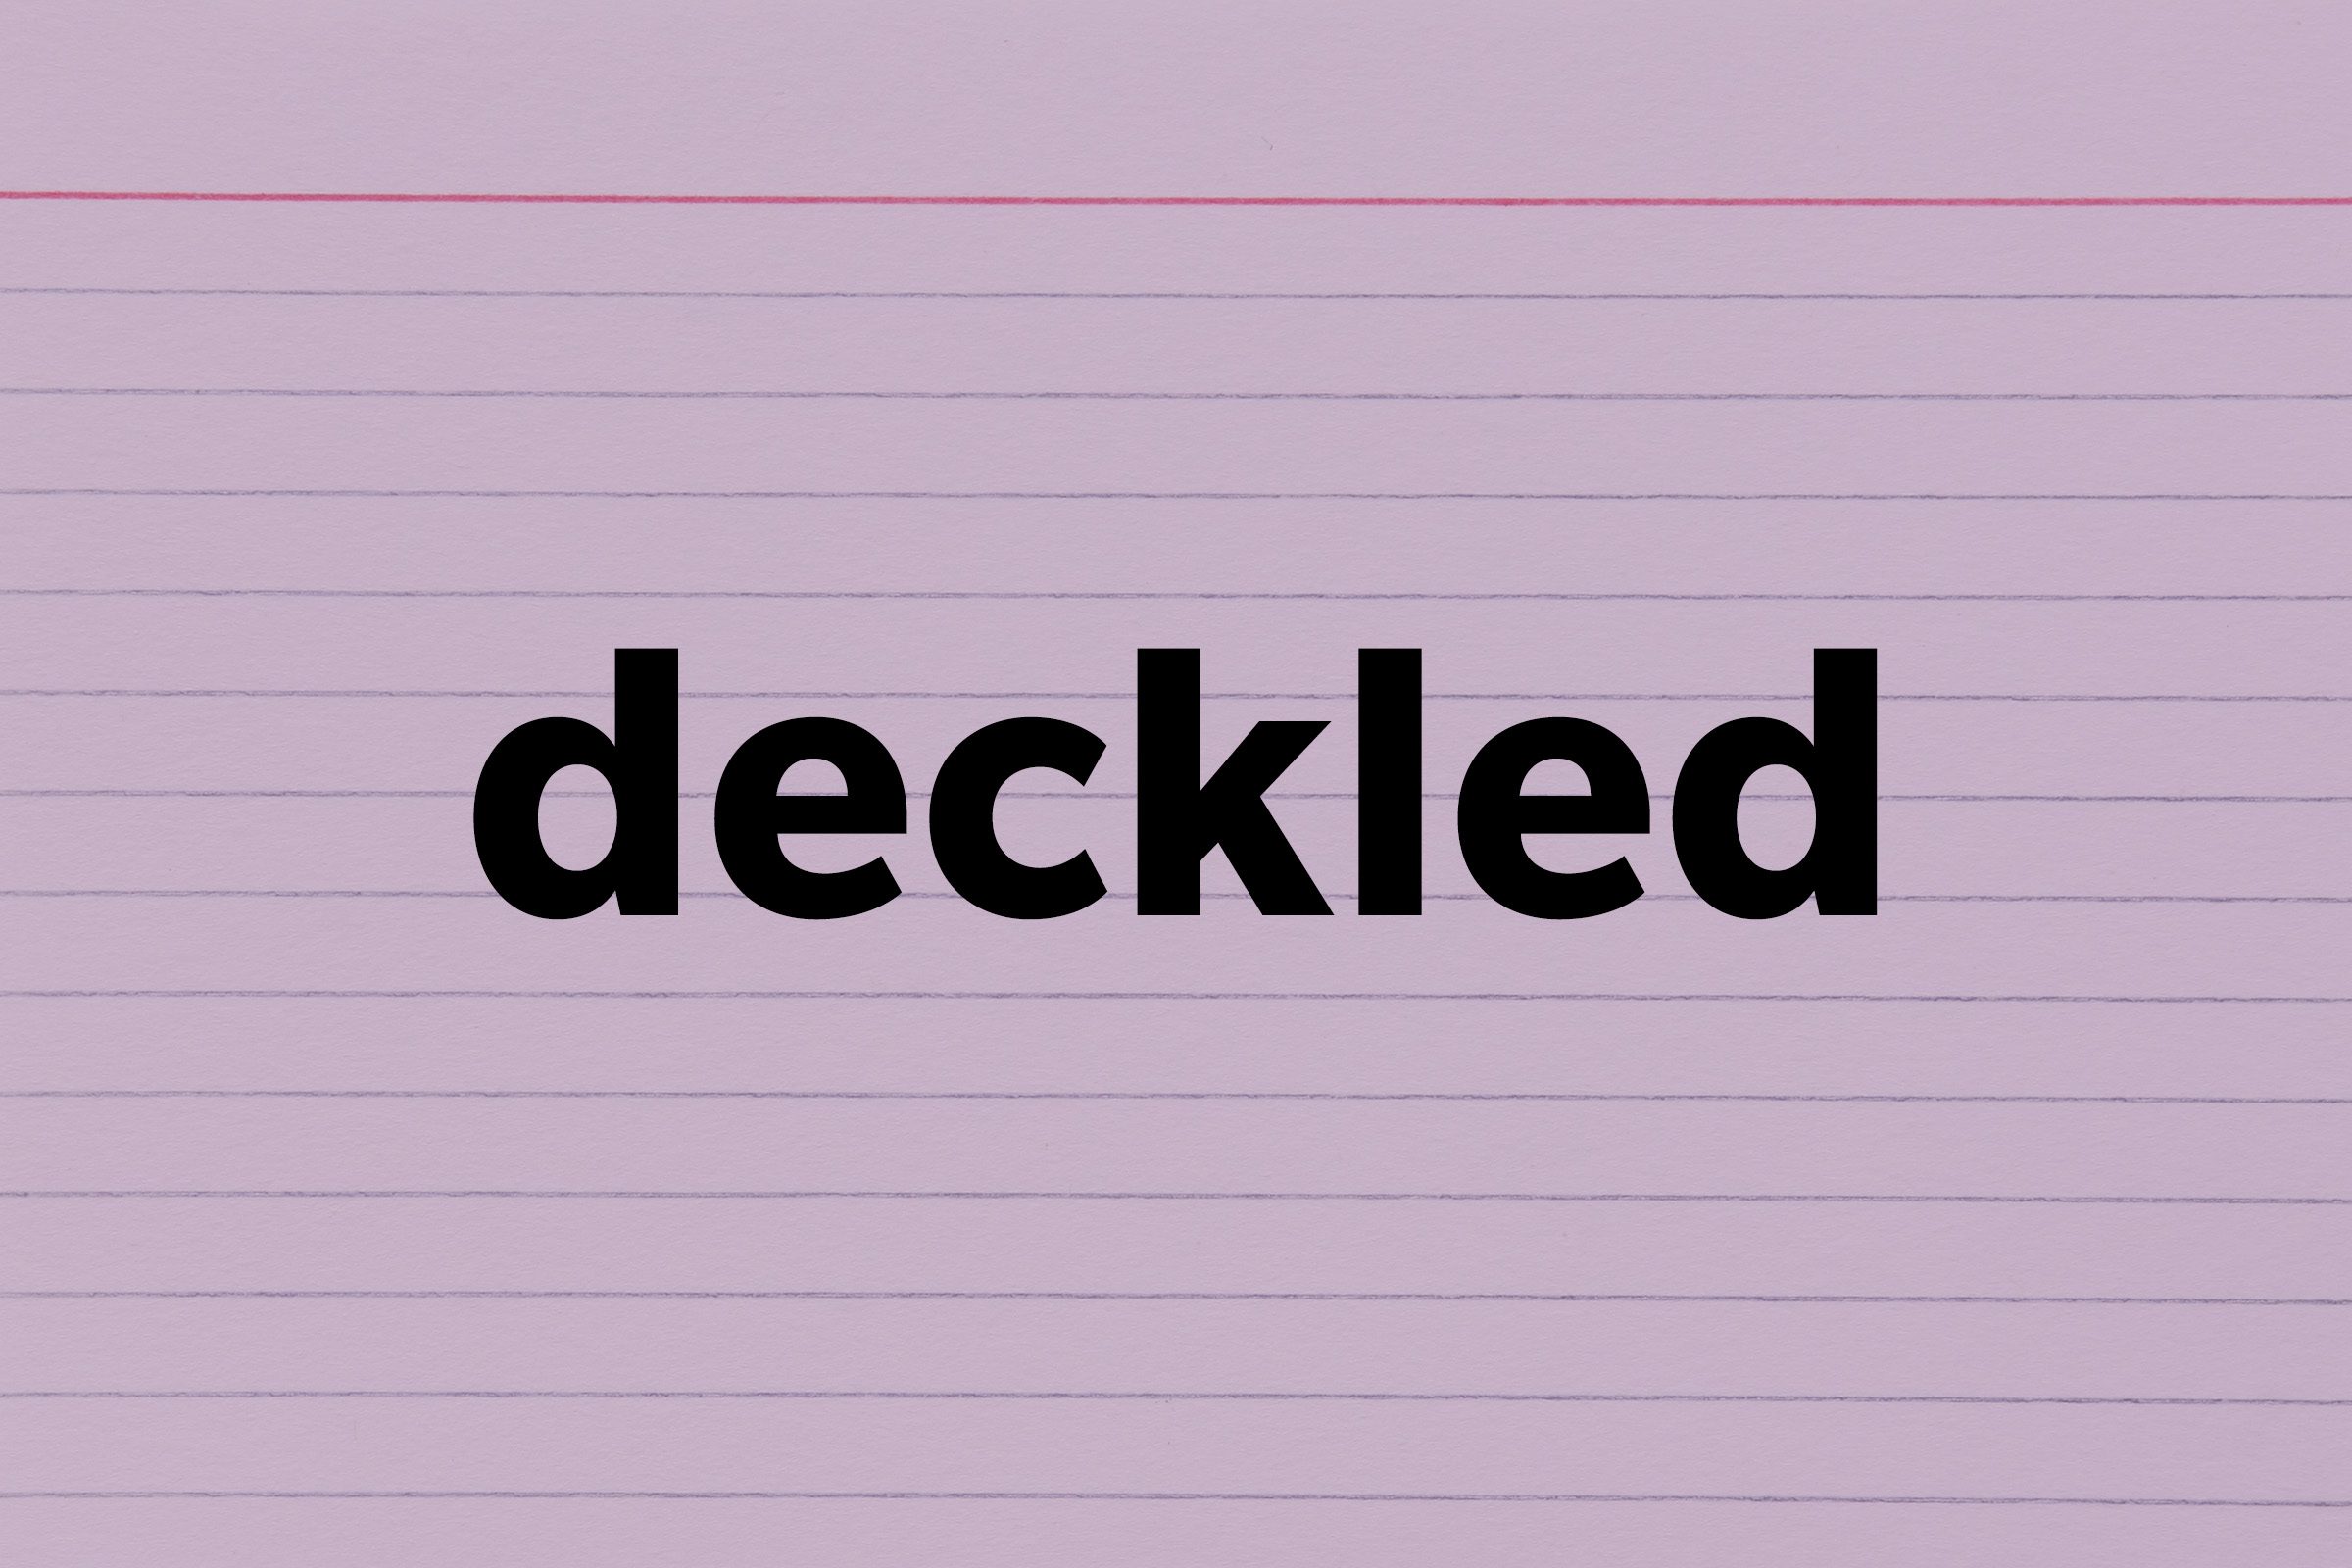 Deckled